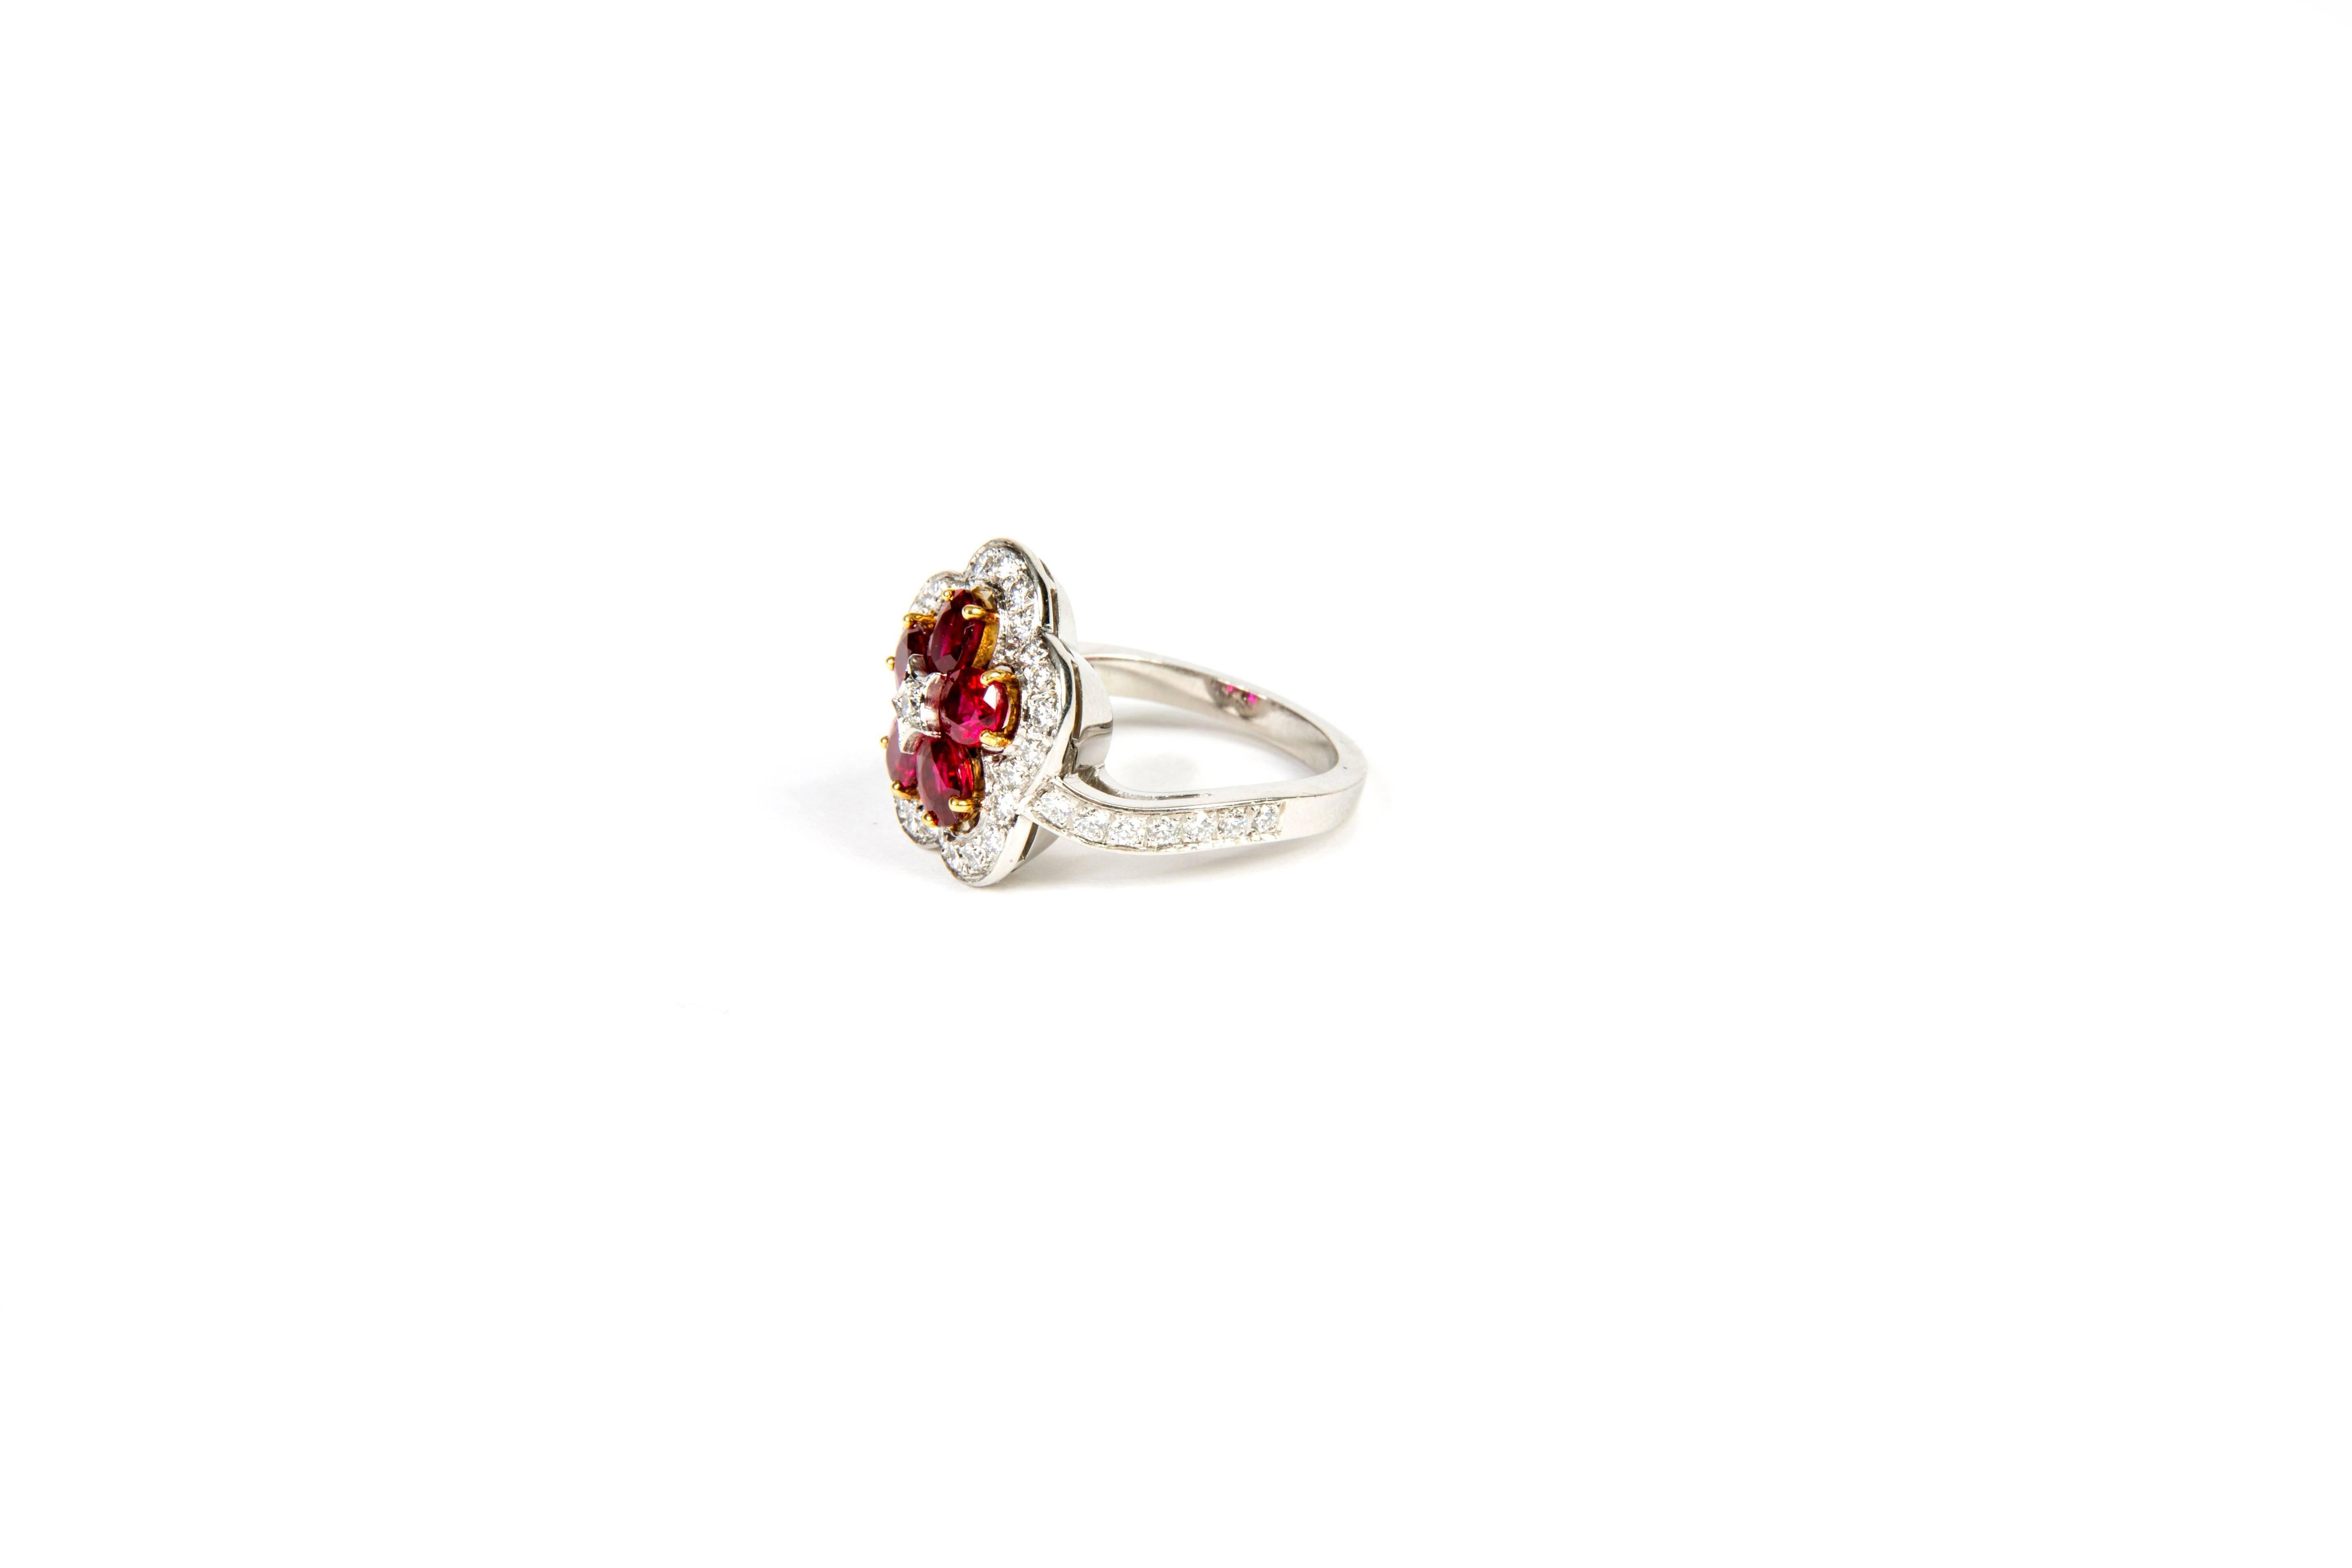 Unique handcrafted 18K white gold ring, featuring five red rubies 2.25 carats, and diamonds 0.90 carats.
This ring brings a truly elegant sign off to all of your looks. Complement the design by pairing with the coordinating earrings and necklace of